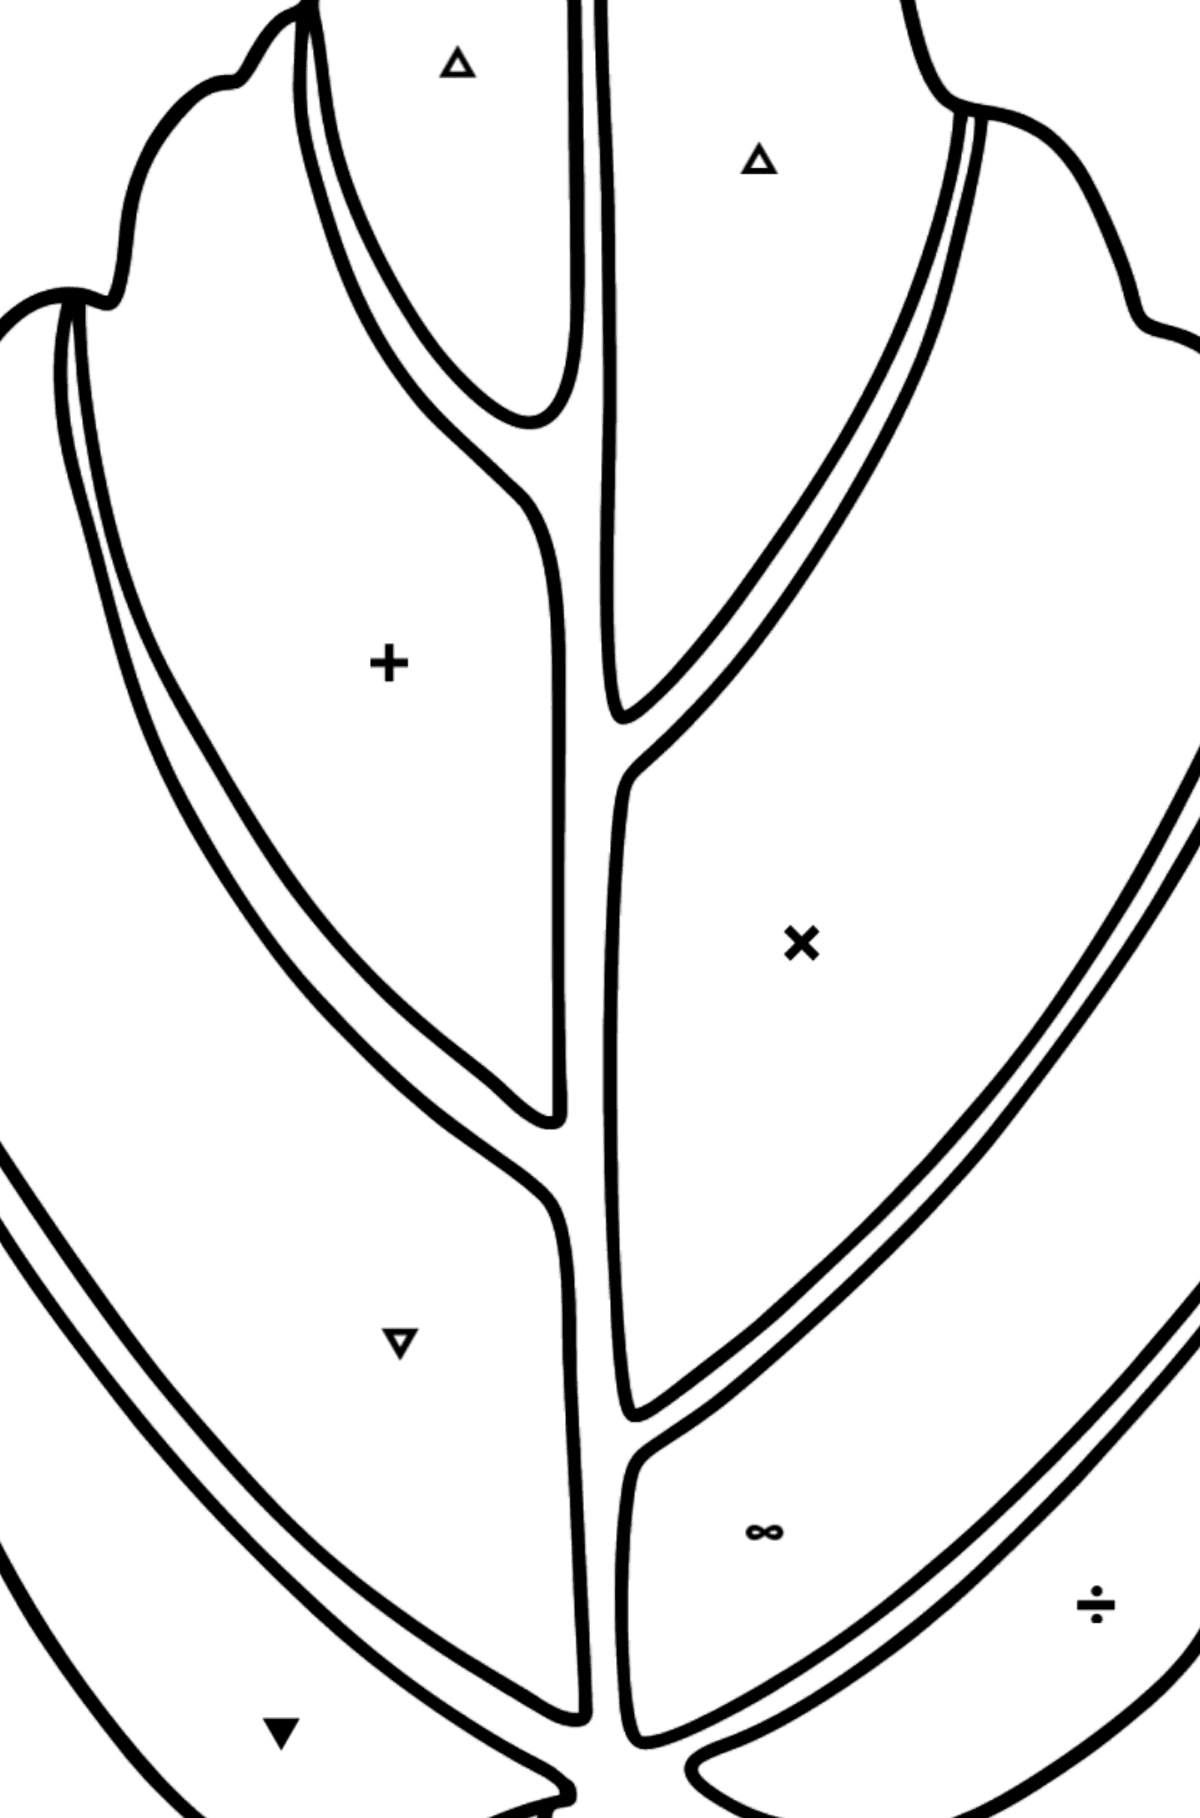 Hamamelis Leaf coloring page - Coloring by Symbols for Kids